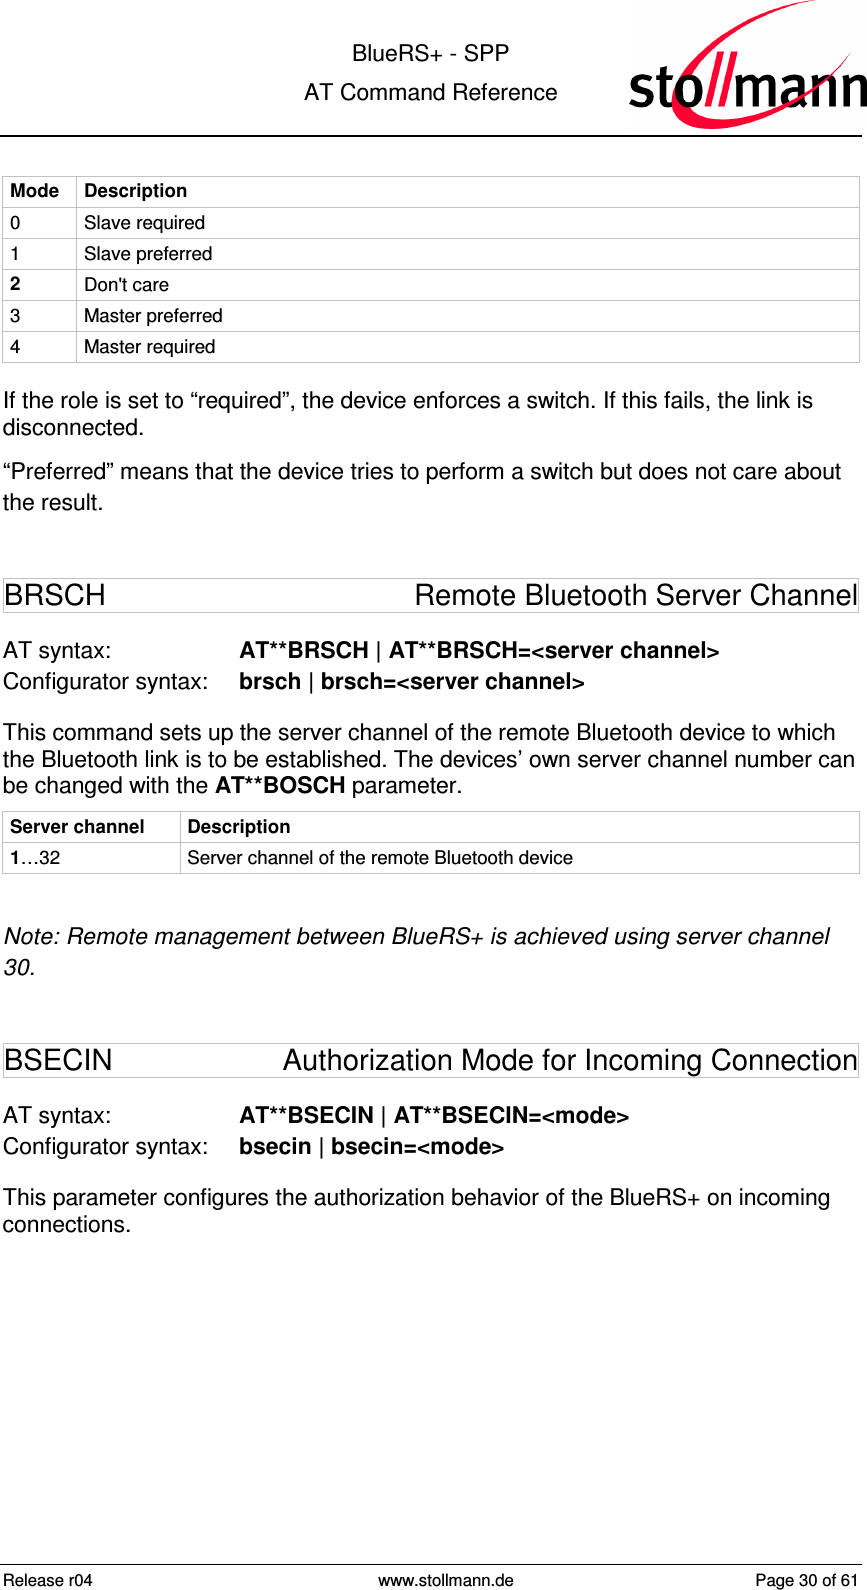  BlueRS+ - SPP AT Command Reference Release r04  www.stollmann.de  Page 30 of 61  Mode  Description 0  Slave required 1  Slave preferred 2  Don&apos;t care 3  Master preferred 4  Master required If the role is set to “required”, the device enforces a switch. If this fails, the link is disconnected.  “Preferred” means that the device tries to perform a switch but does not care about the result. BRSCH  Remote Bluetooth Server Channel AT syntax:  AT**BRSCH | AT**BRSCH=&lt;server channel&gt; Configurator syntax:  brsch | brsch=&lt;server channel&gt; This command sets up the server channel of the remote Bluetooth device to which the Bluetooth link is to be established. The devices’ own server channel number can be changed with the AT**BOSCH parameter.  Server channel  Description 1…32 Server channel of the remote Bluetooth device  Note: Remote management between BlueRS+ is achieved using server channel 30. BSECIN  Authorization Mode for Incoming Connection  AT syntax:  AT**BSECIN | AT**BSECIN=&lt;mode&gt; Configurator syntax:  bsecin | bsecin=&lt;mode&gt; This parameter configures the authorization behavior of the BlueRS+ on incoming connections.  